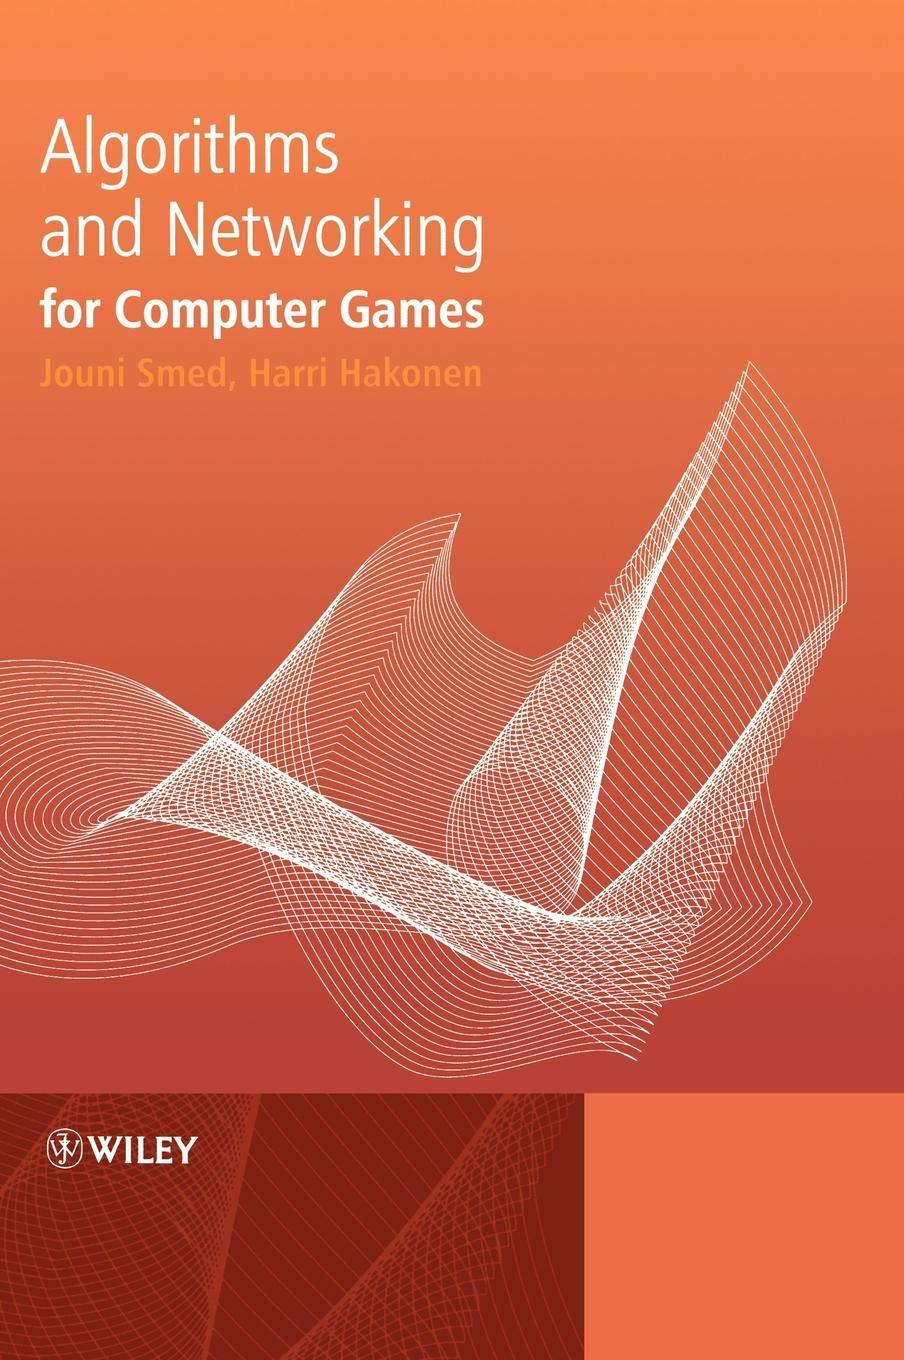 algorithms and networking for computer games 1st edition jouni smed, harri hakonen 0470018127, 9780470018125